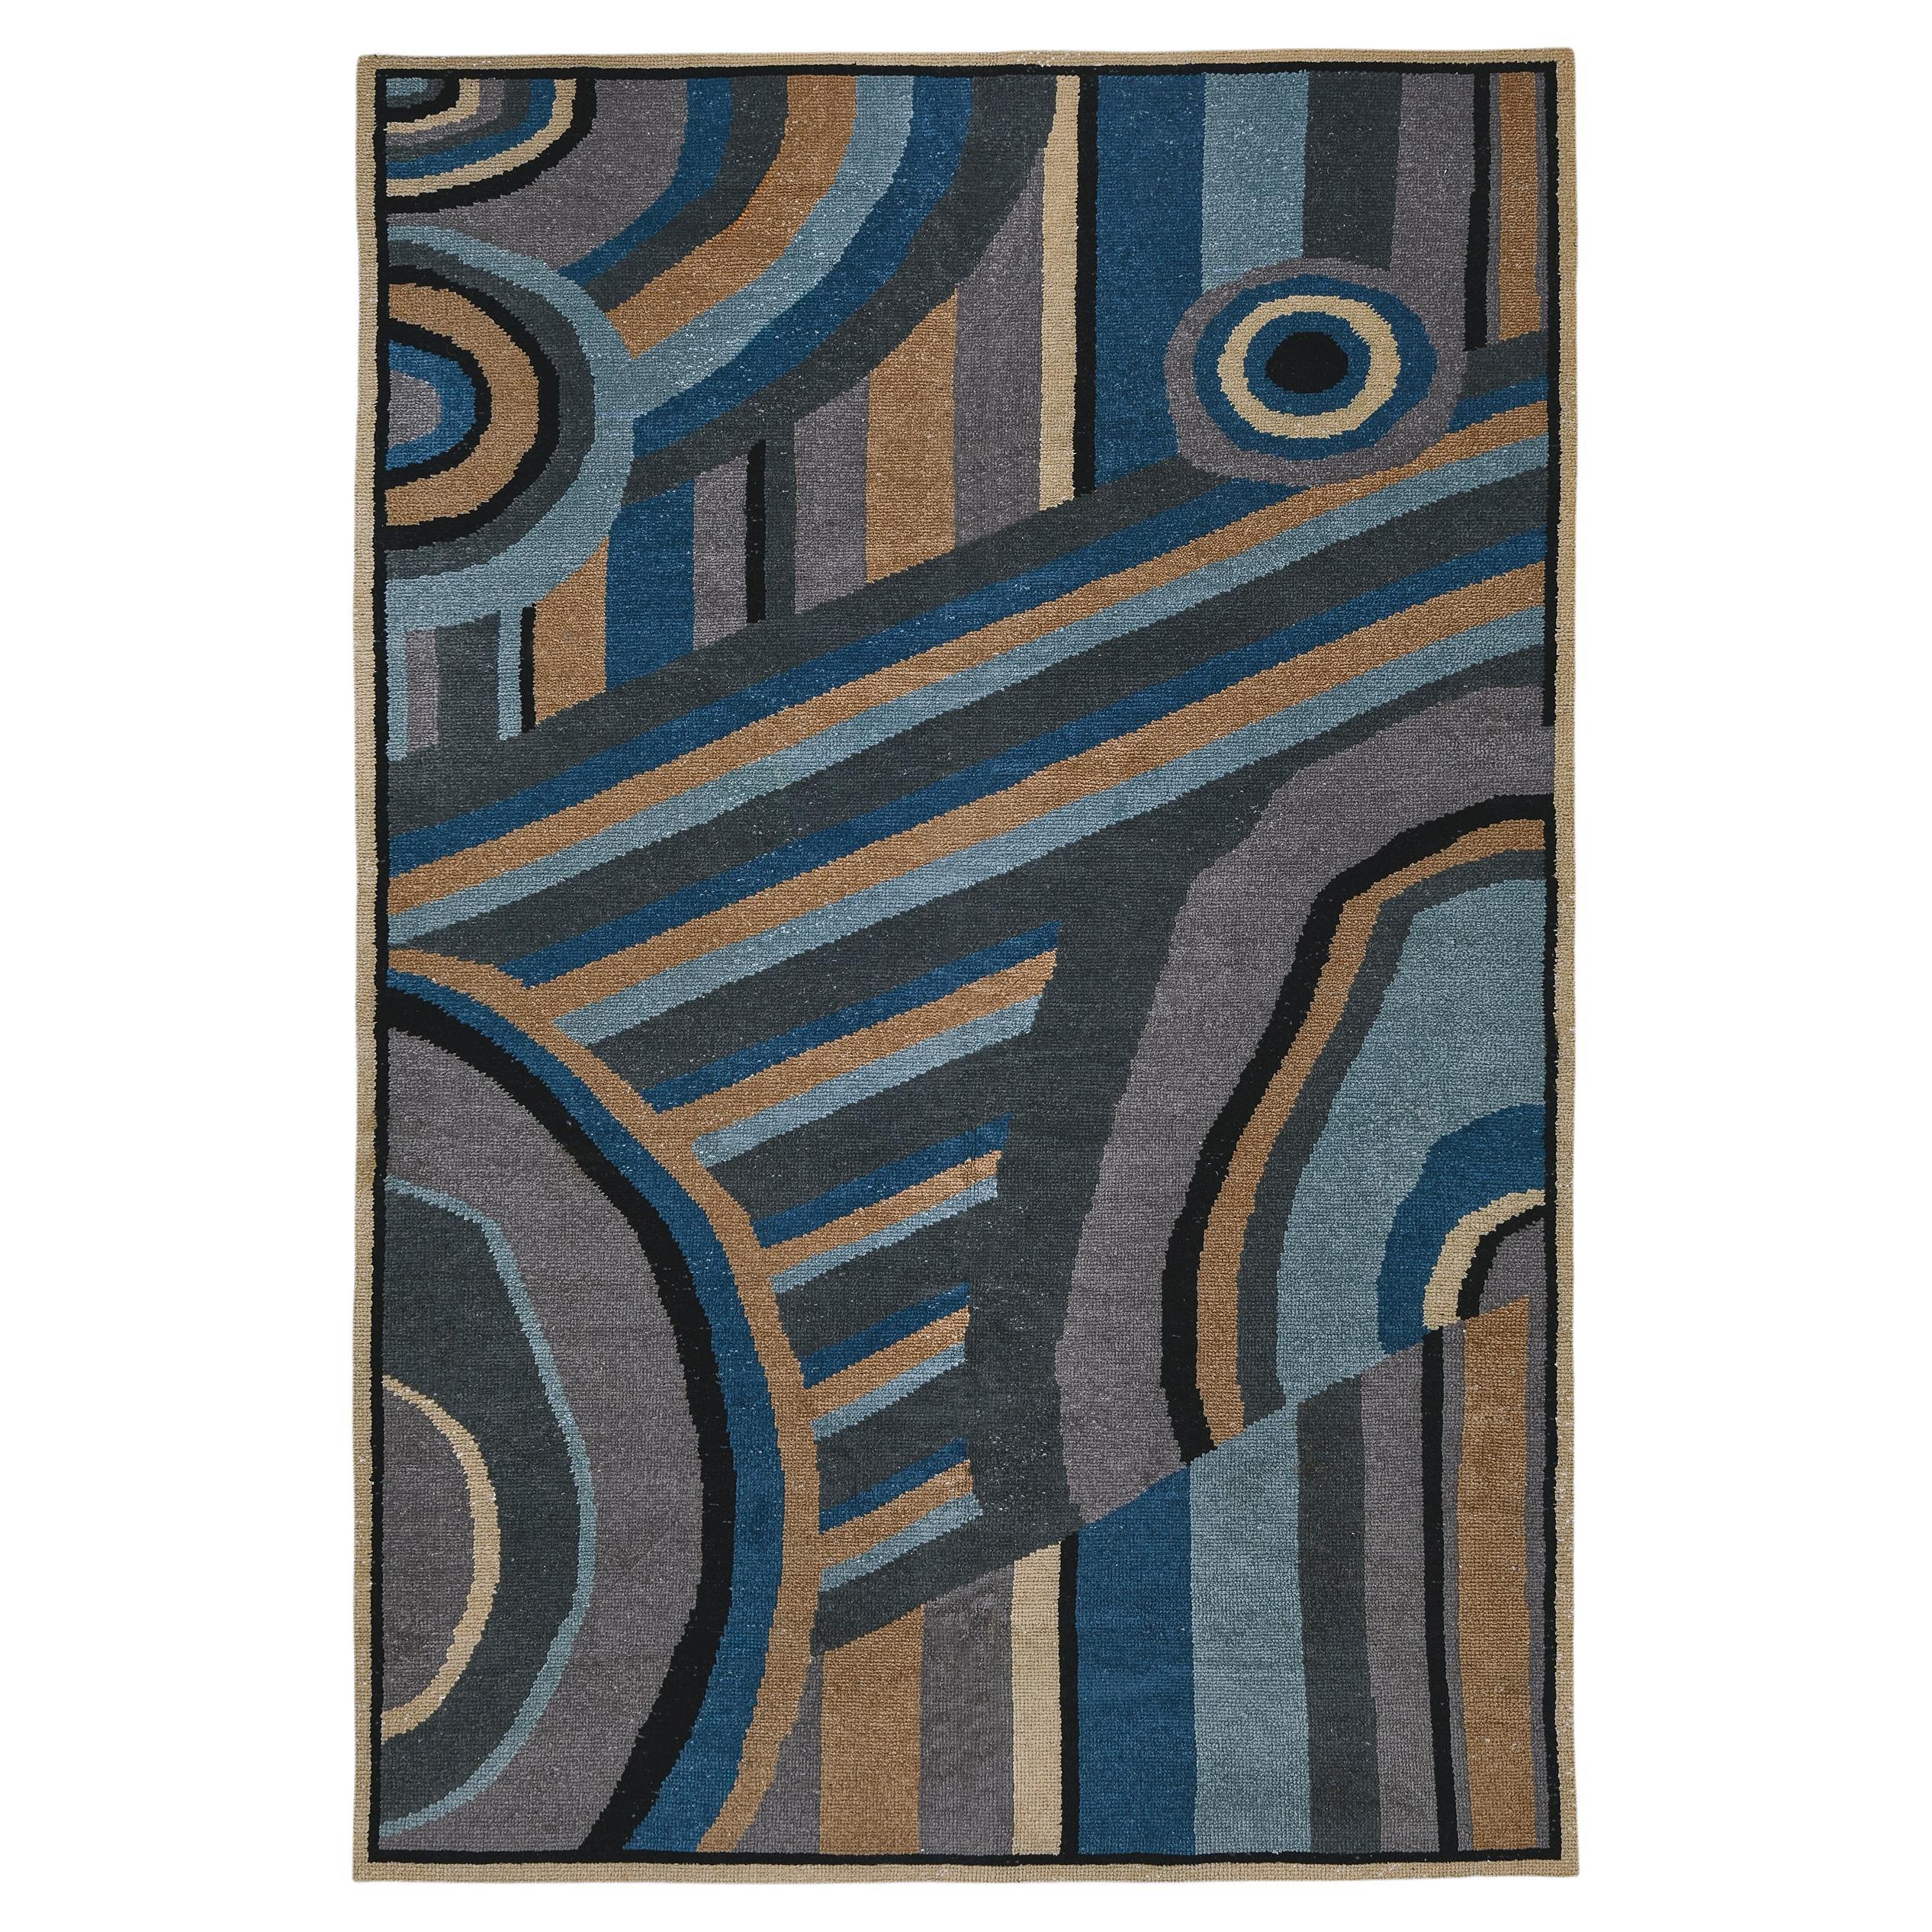 Early 20th Century French Deco Rug